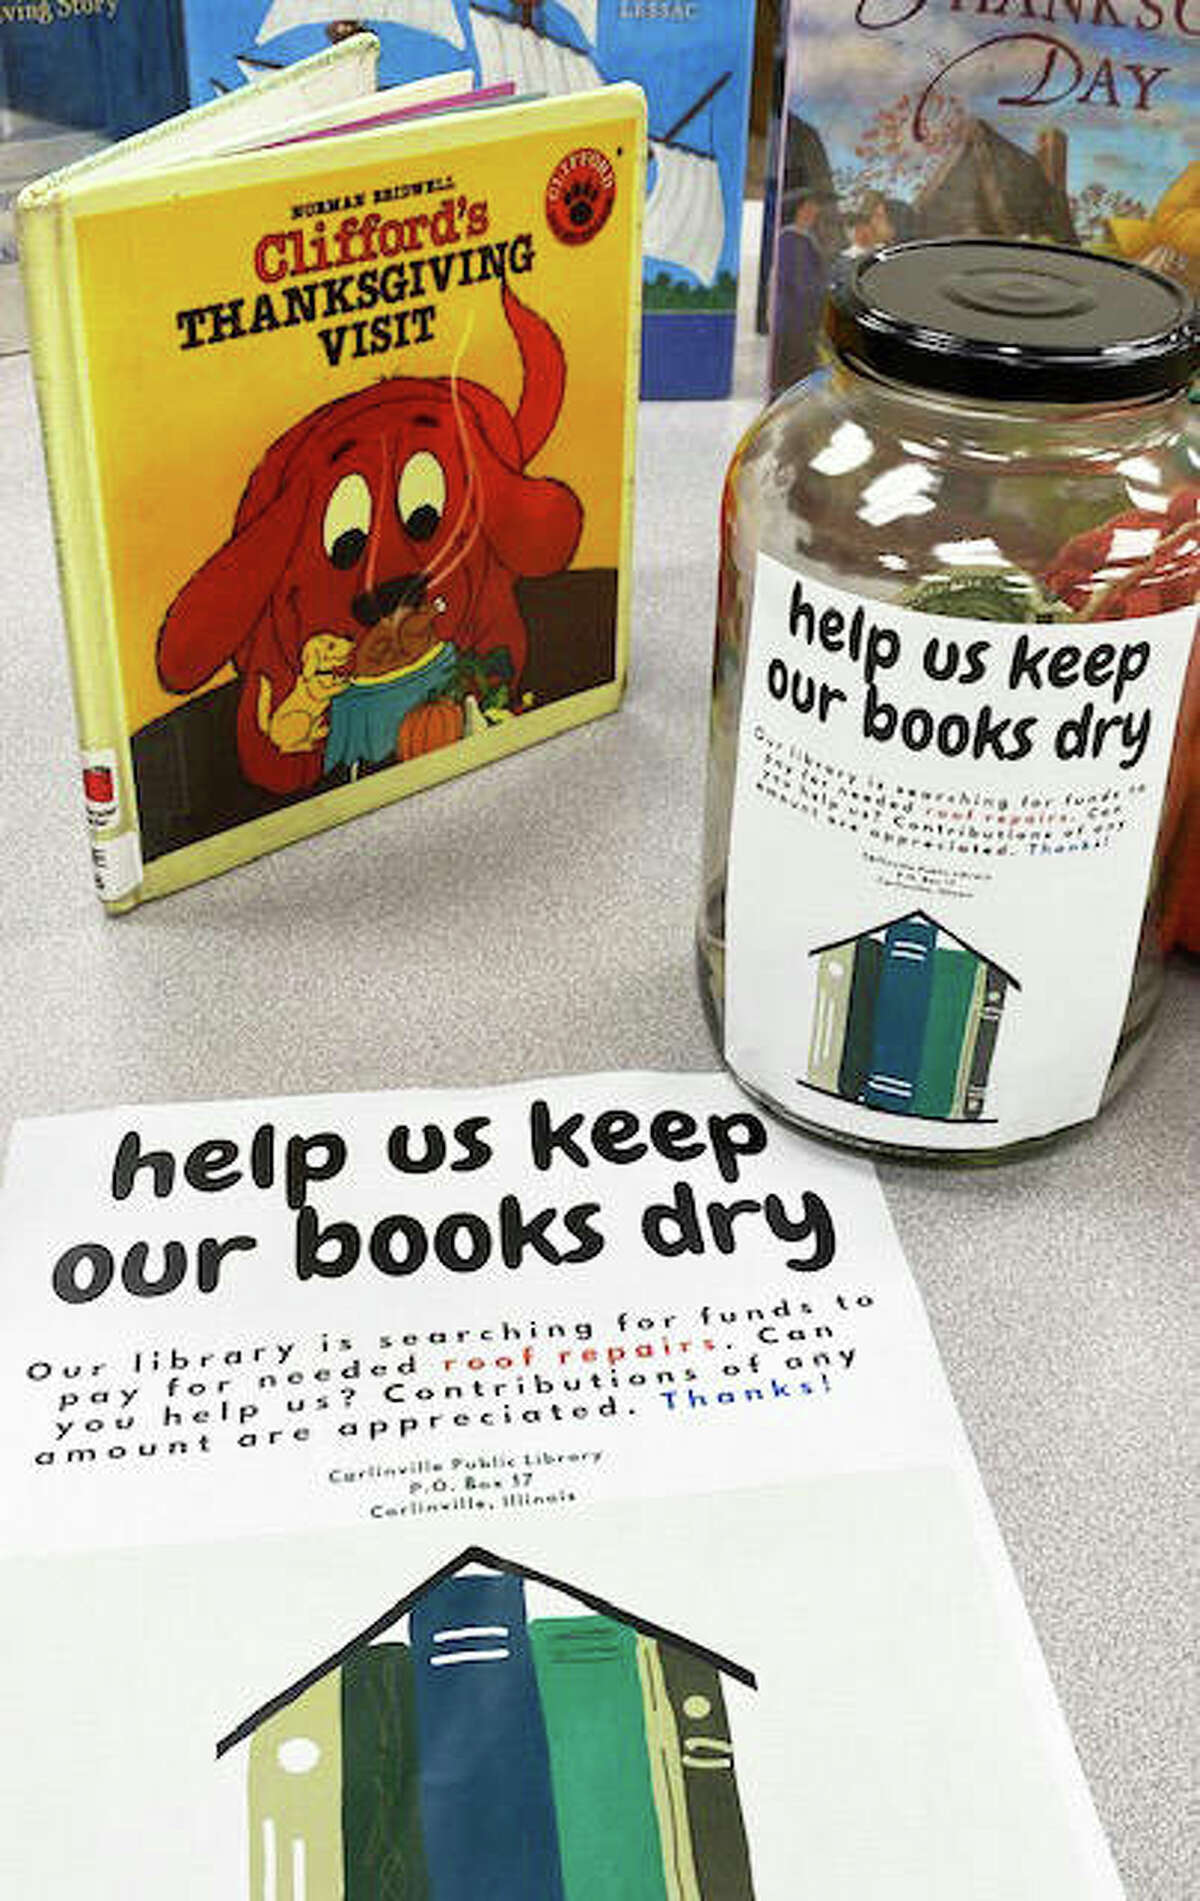 “Help Us Keep Our Books Dry” is a theme in the Carlinville Public Library’s drive to seek funding to offset the cost of a new roof. The library’s share of the cost of the roof could be as high as $80,000, and could affect the library’s budget for years to come. A GoFundMe page has also been set up for donations to the project, and residents are also invited the GoFundMe link on social media.